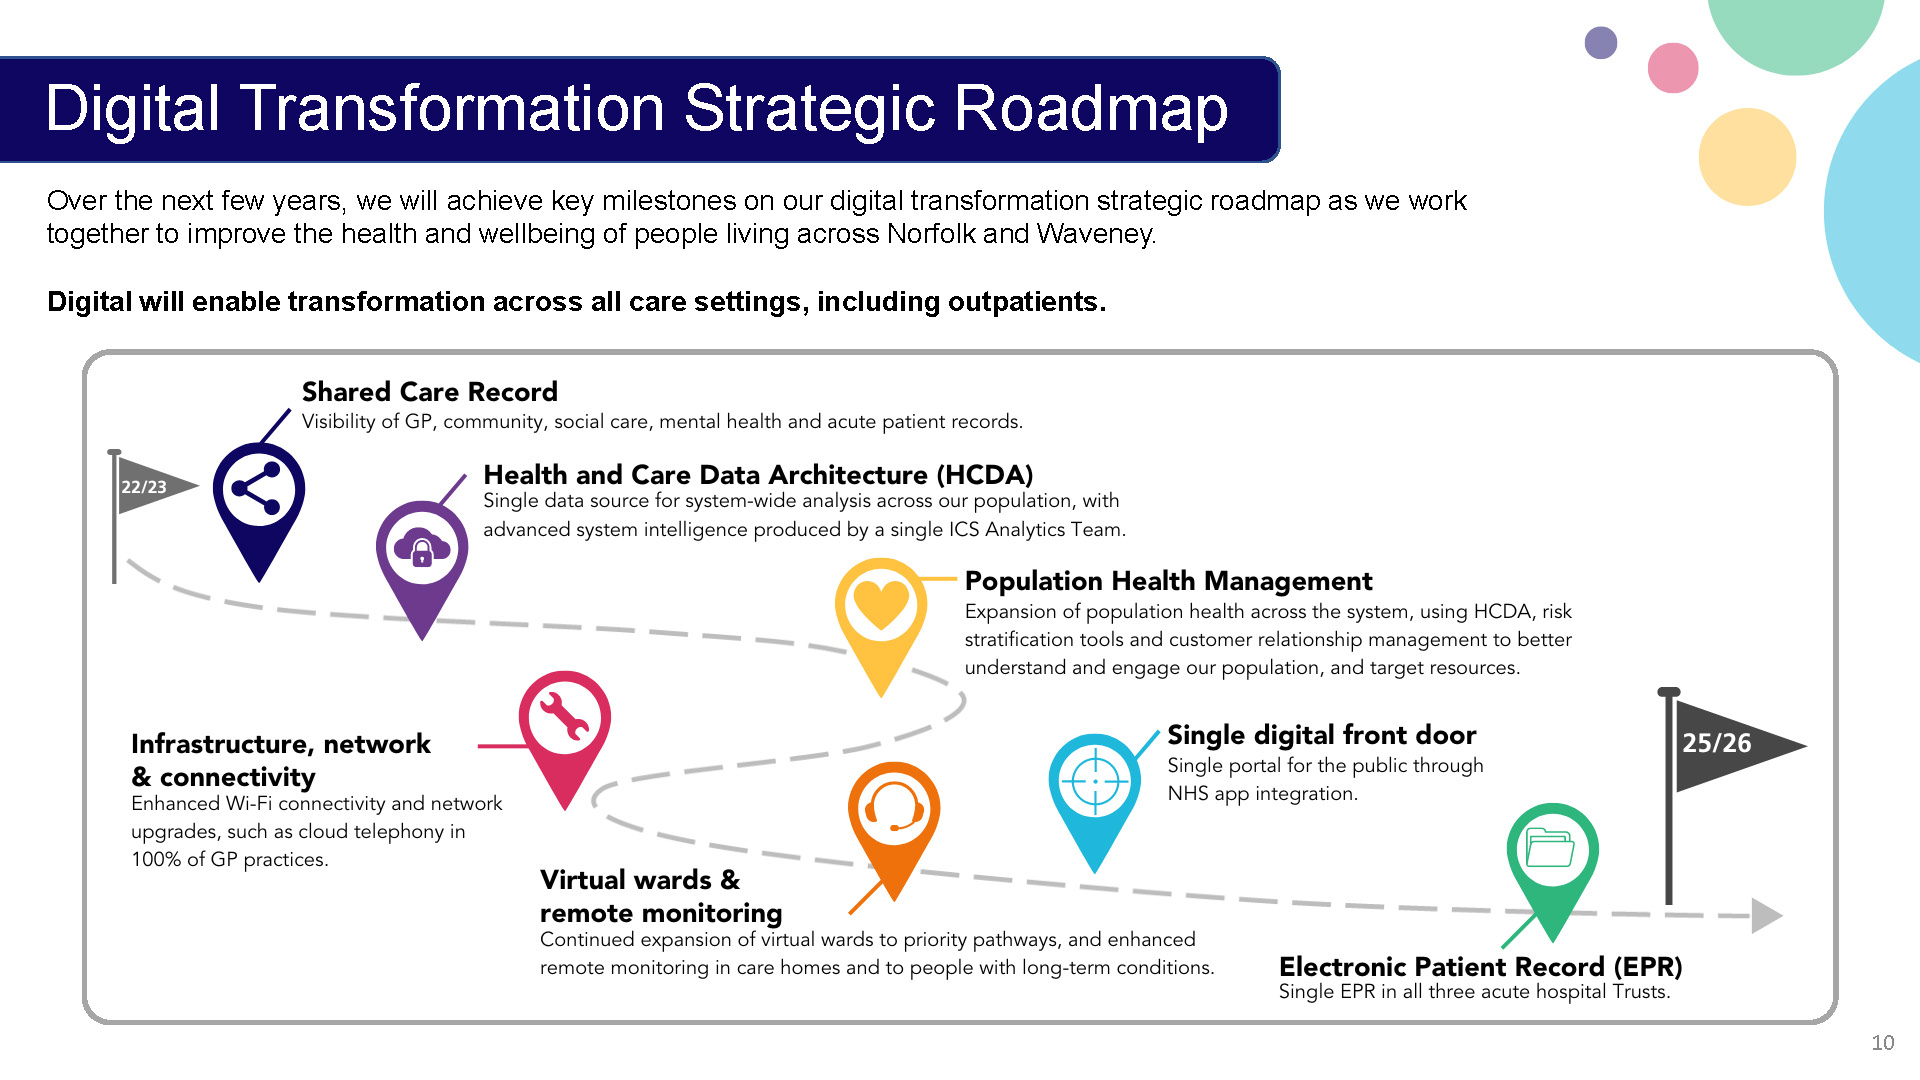 Strategic Roadmap - shared care record; health and care data architecture; population health management; infrastructure, network and connectivity; virtual wards and remote monitoring; single digital front door; electronic patient record.